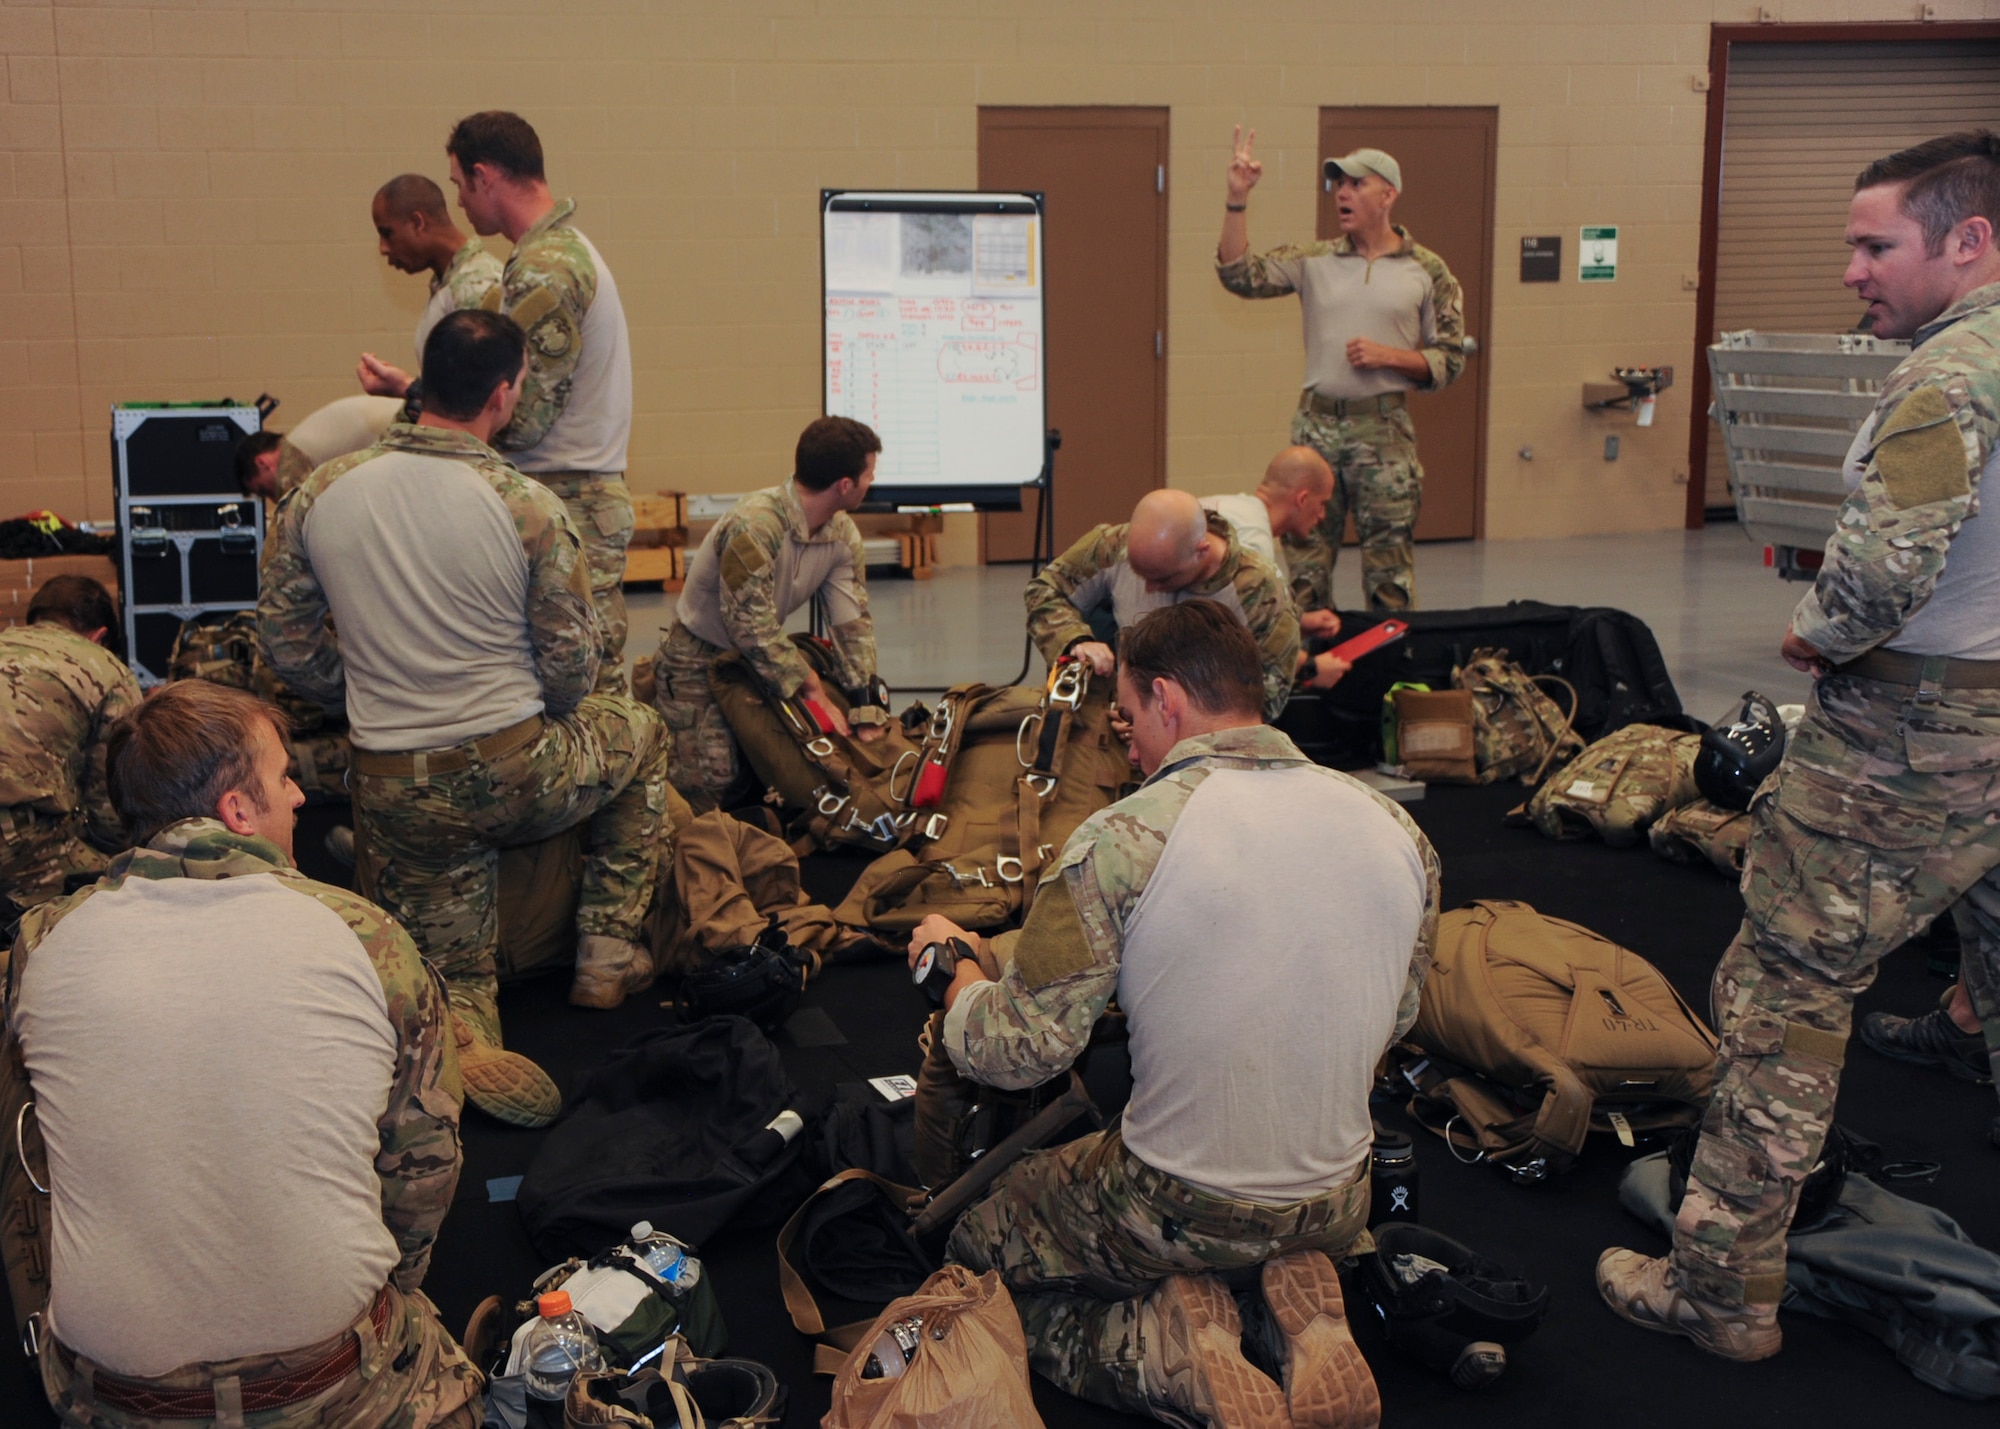 U.S. Airmen prepare equipment during the Military Freefall Jumpmaster Course at Davis-Monthan Air Force Base, Ariz., June 28, 2016. Students vary from tactical air control party specialists, combat controllers, pararescuemen, and survival, evasion, resistance and escape specialists from all different commands. (U.S. Air Force photo by Airman Nathan H. Barbour/Released)